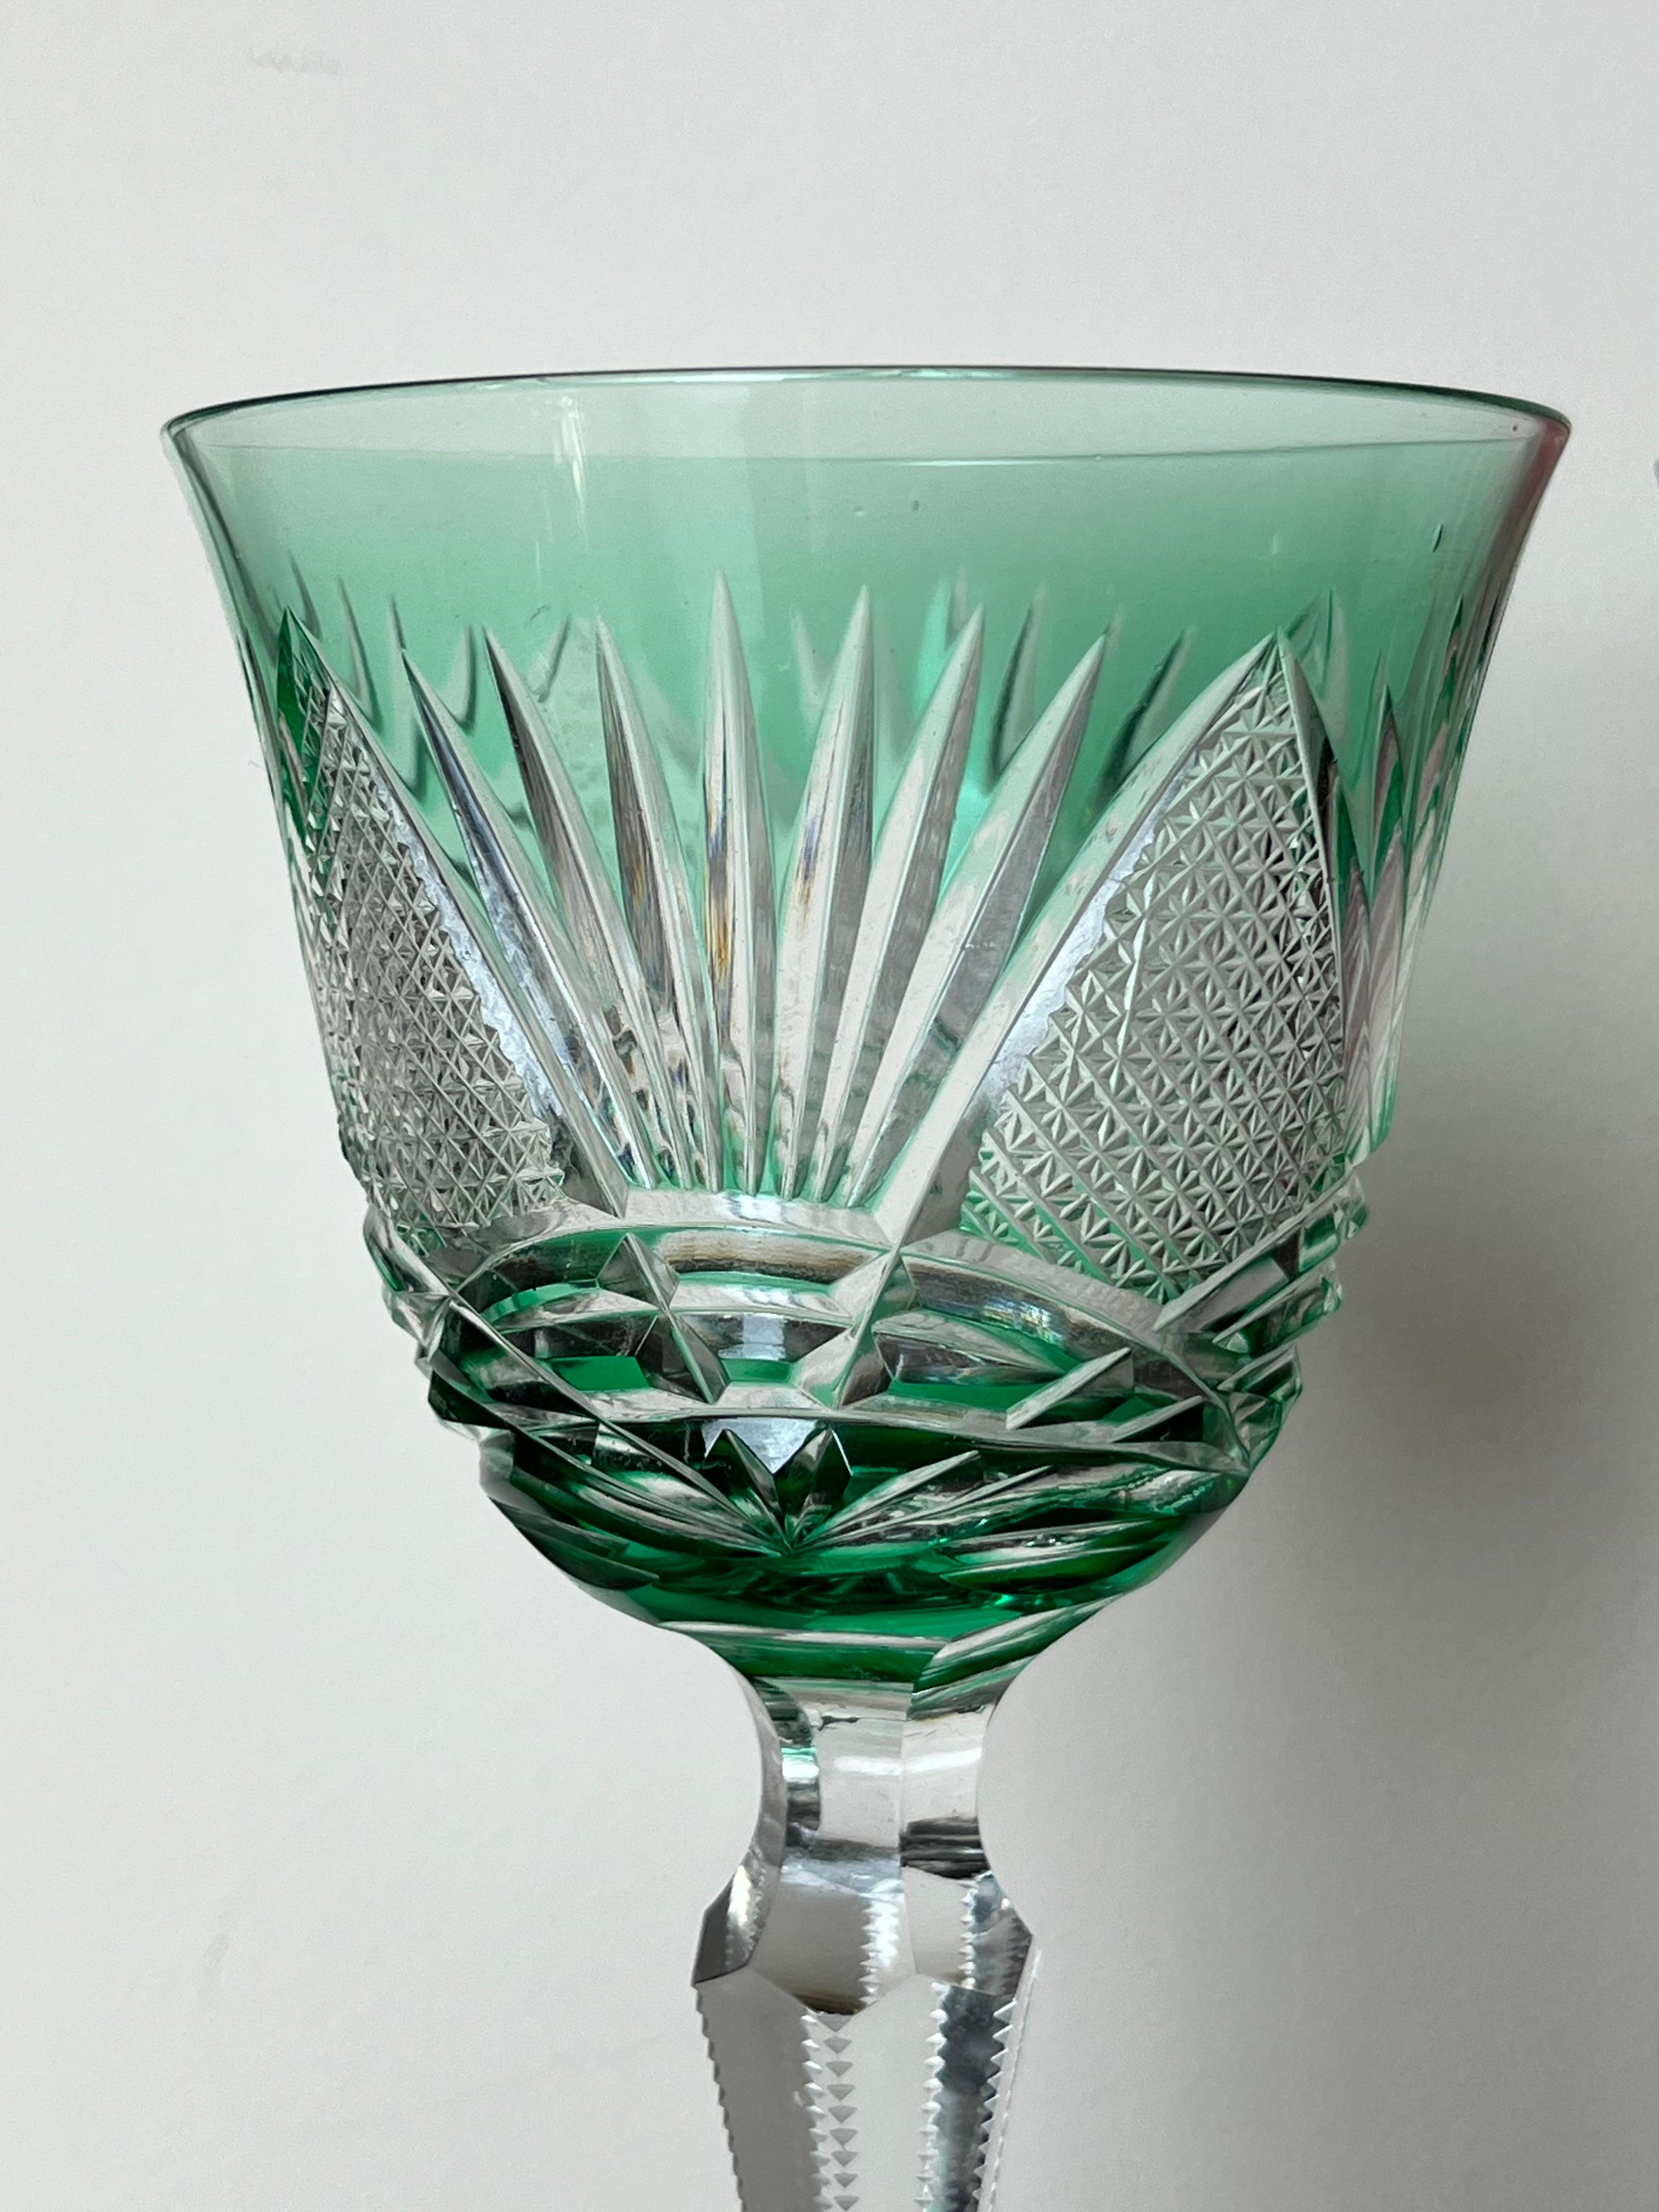 Set of 6 Colored Crystal Glasses, Italy, 1950s For Sale 1